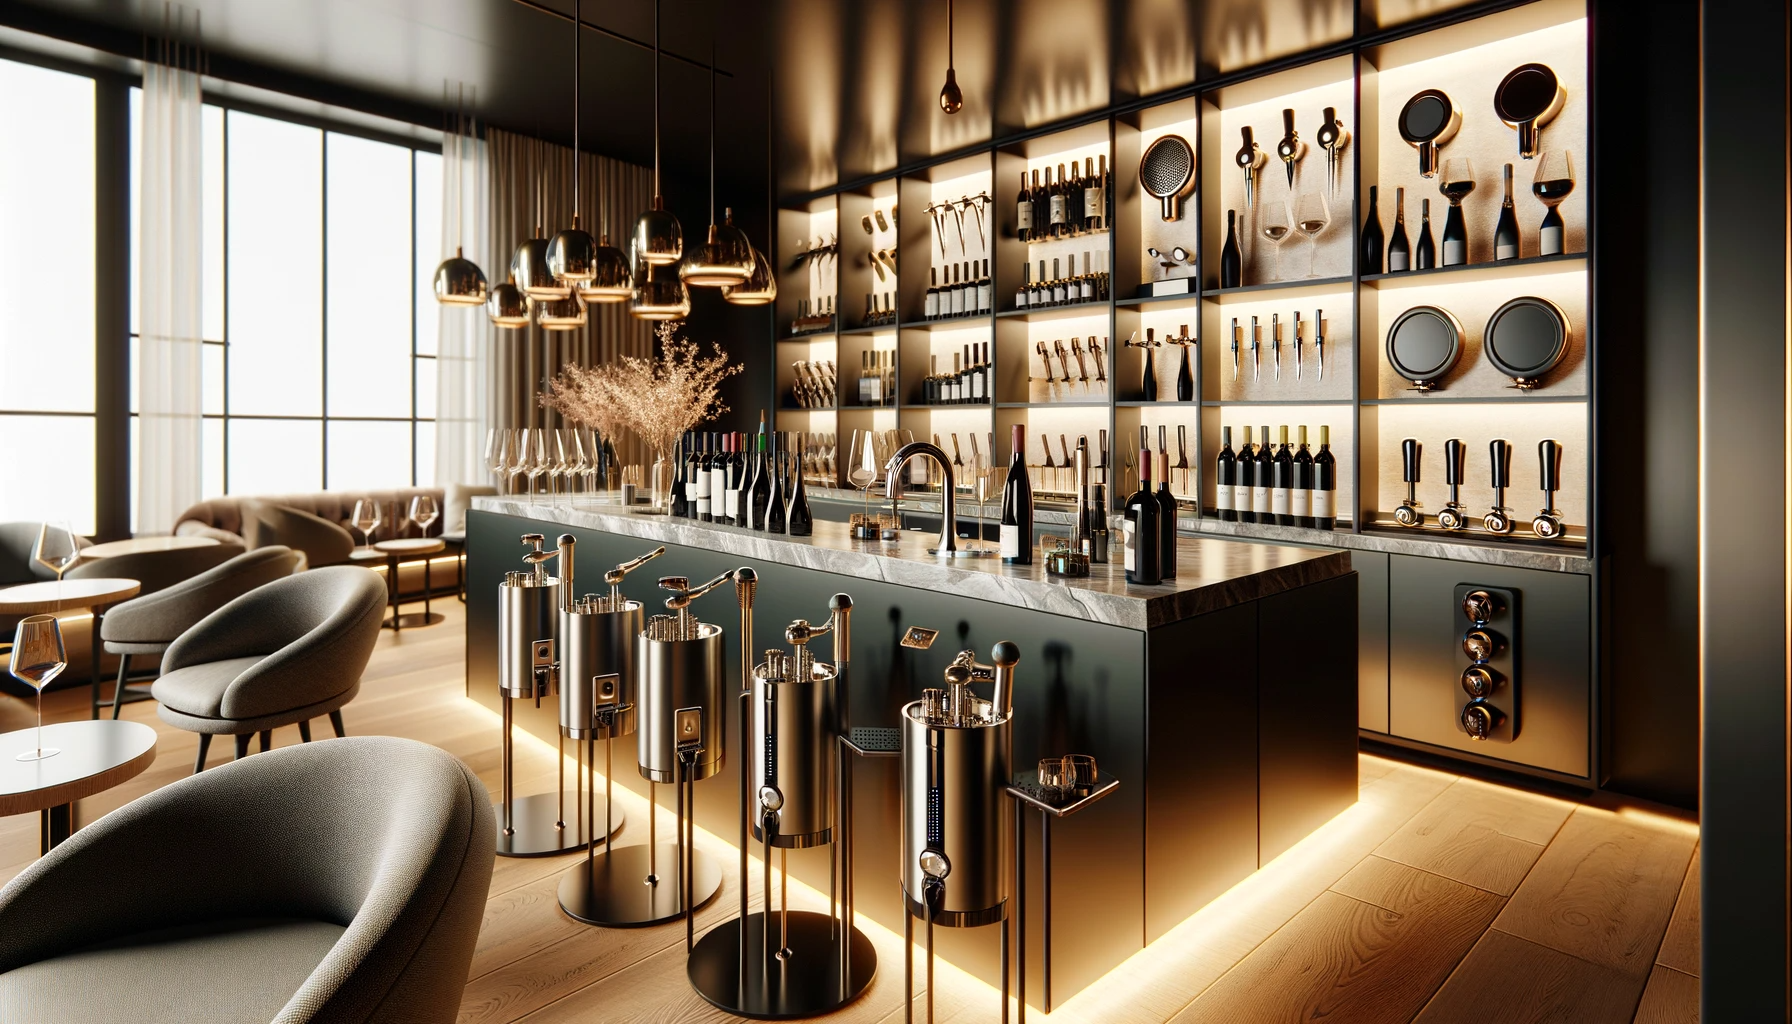 best wine accessories: A modern, elegantly designed wine bar set in 2023, featuring the latest wine accessories artistically displayed